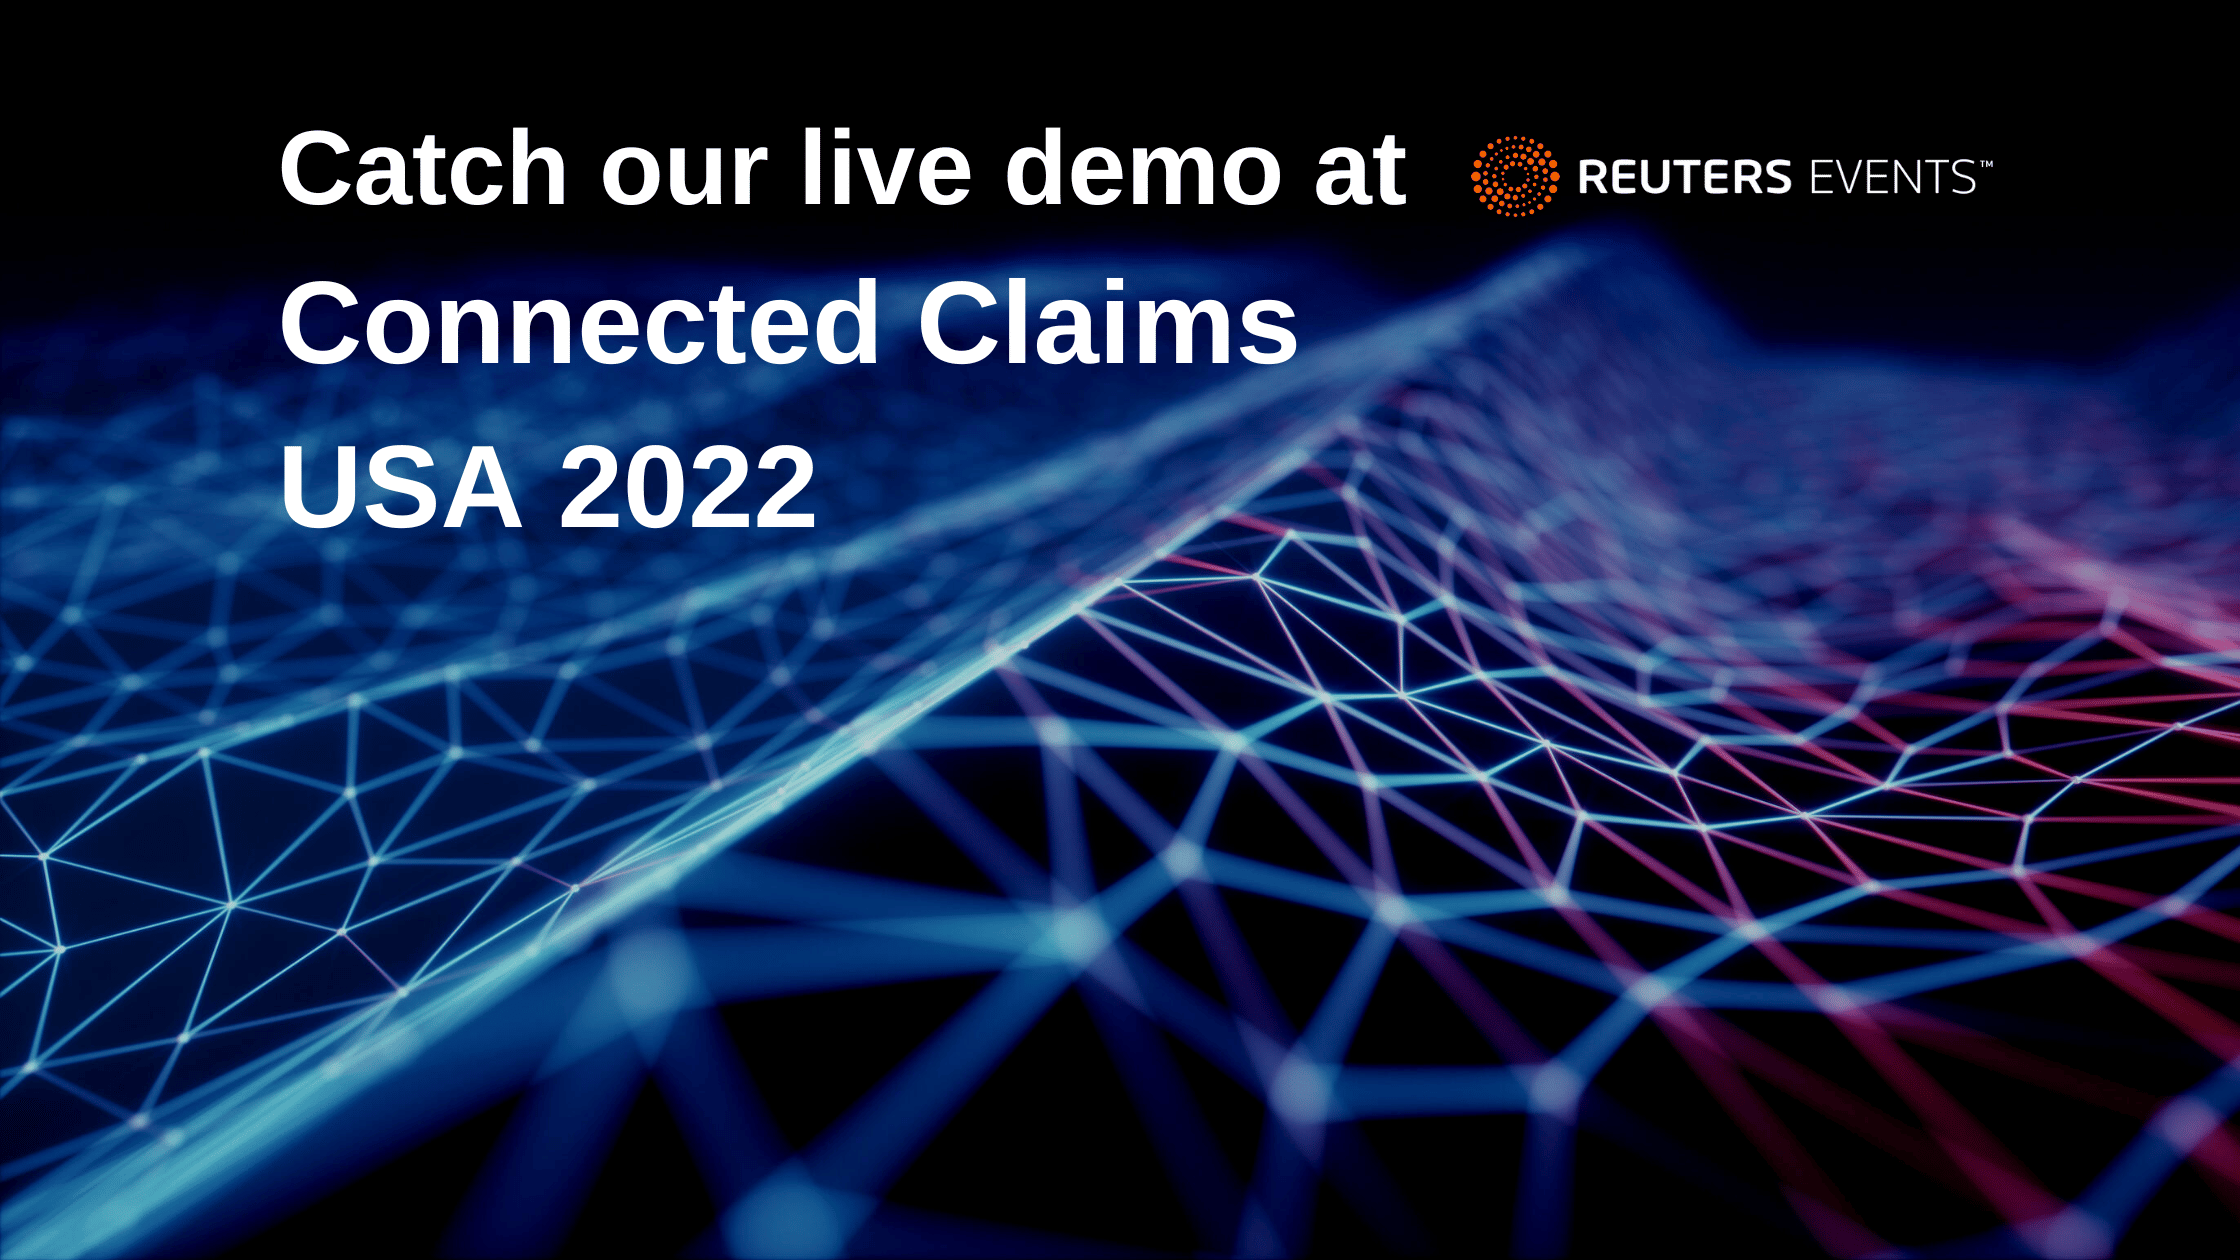 Catch our live demo at Connected Claims USA 2022 2 - Claim Genius Events